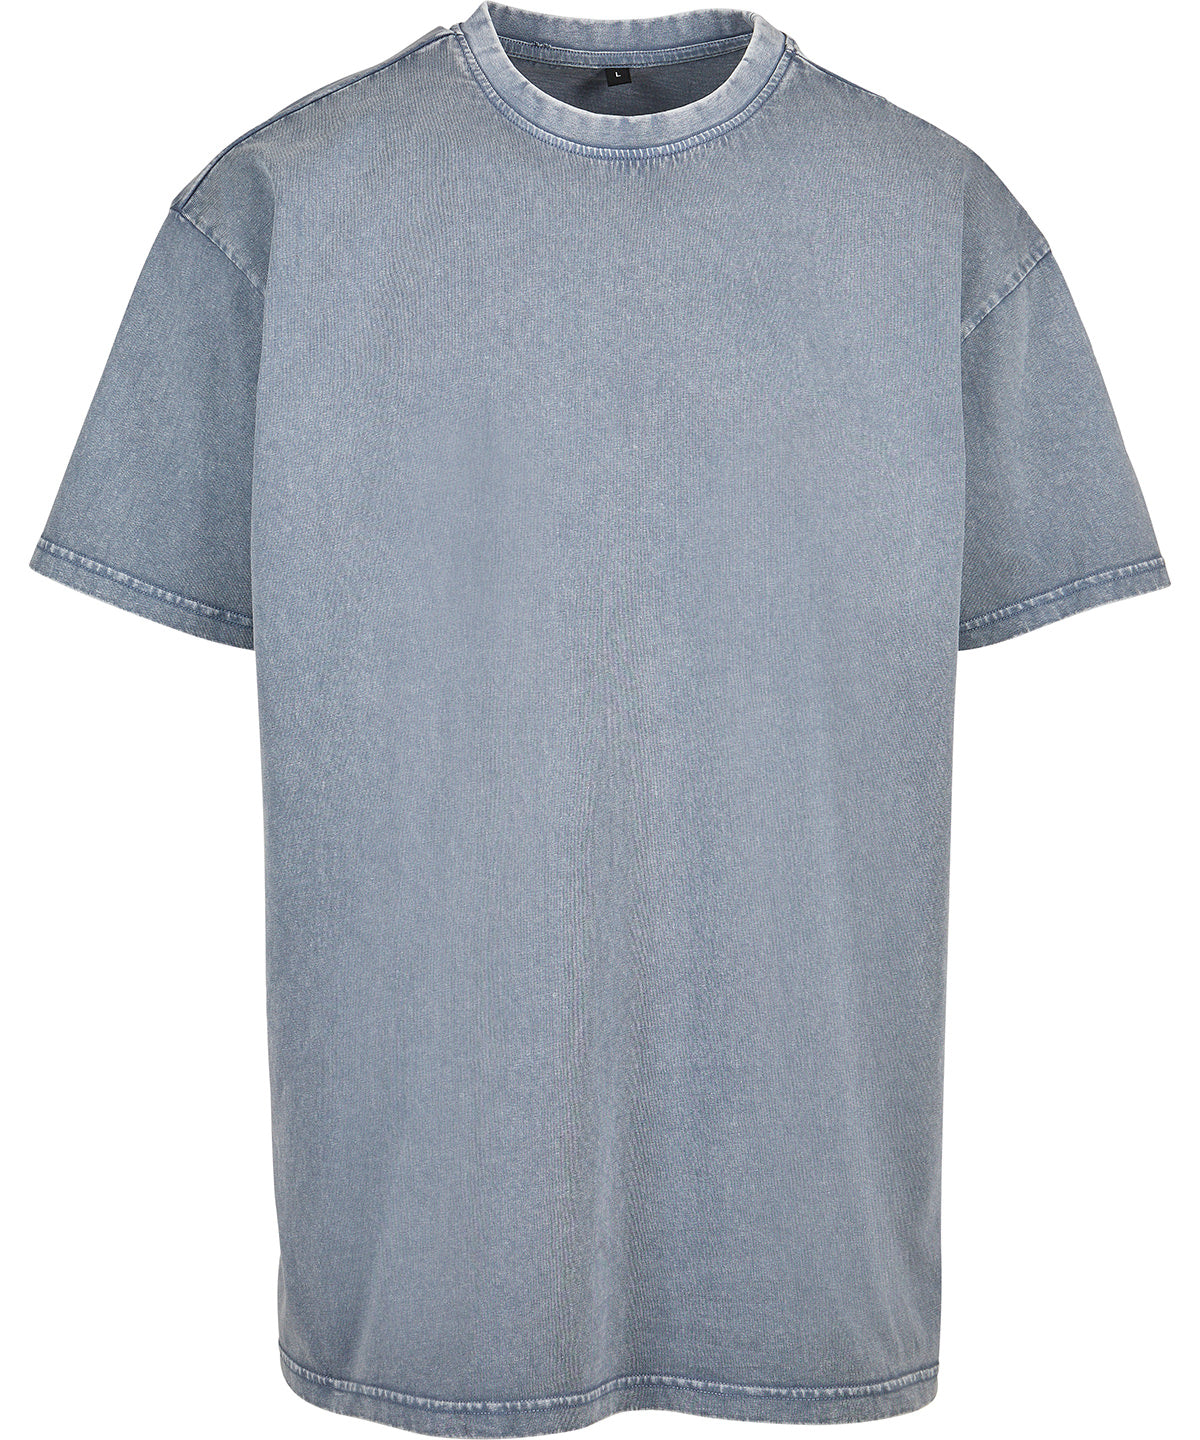 Personalised T-Shirts - Mid Grey Build Your Brand Acid washed heavy oversized tee